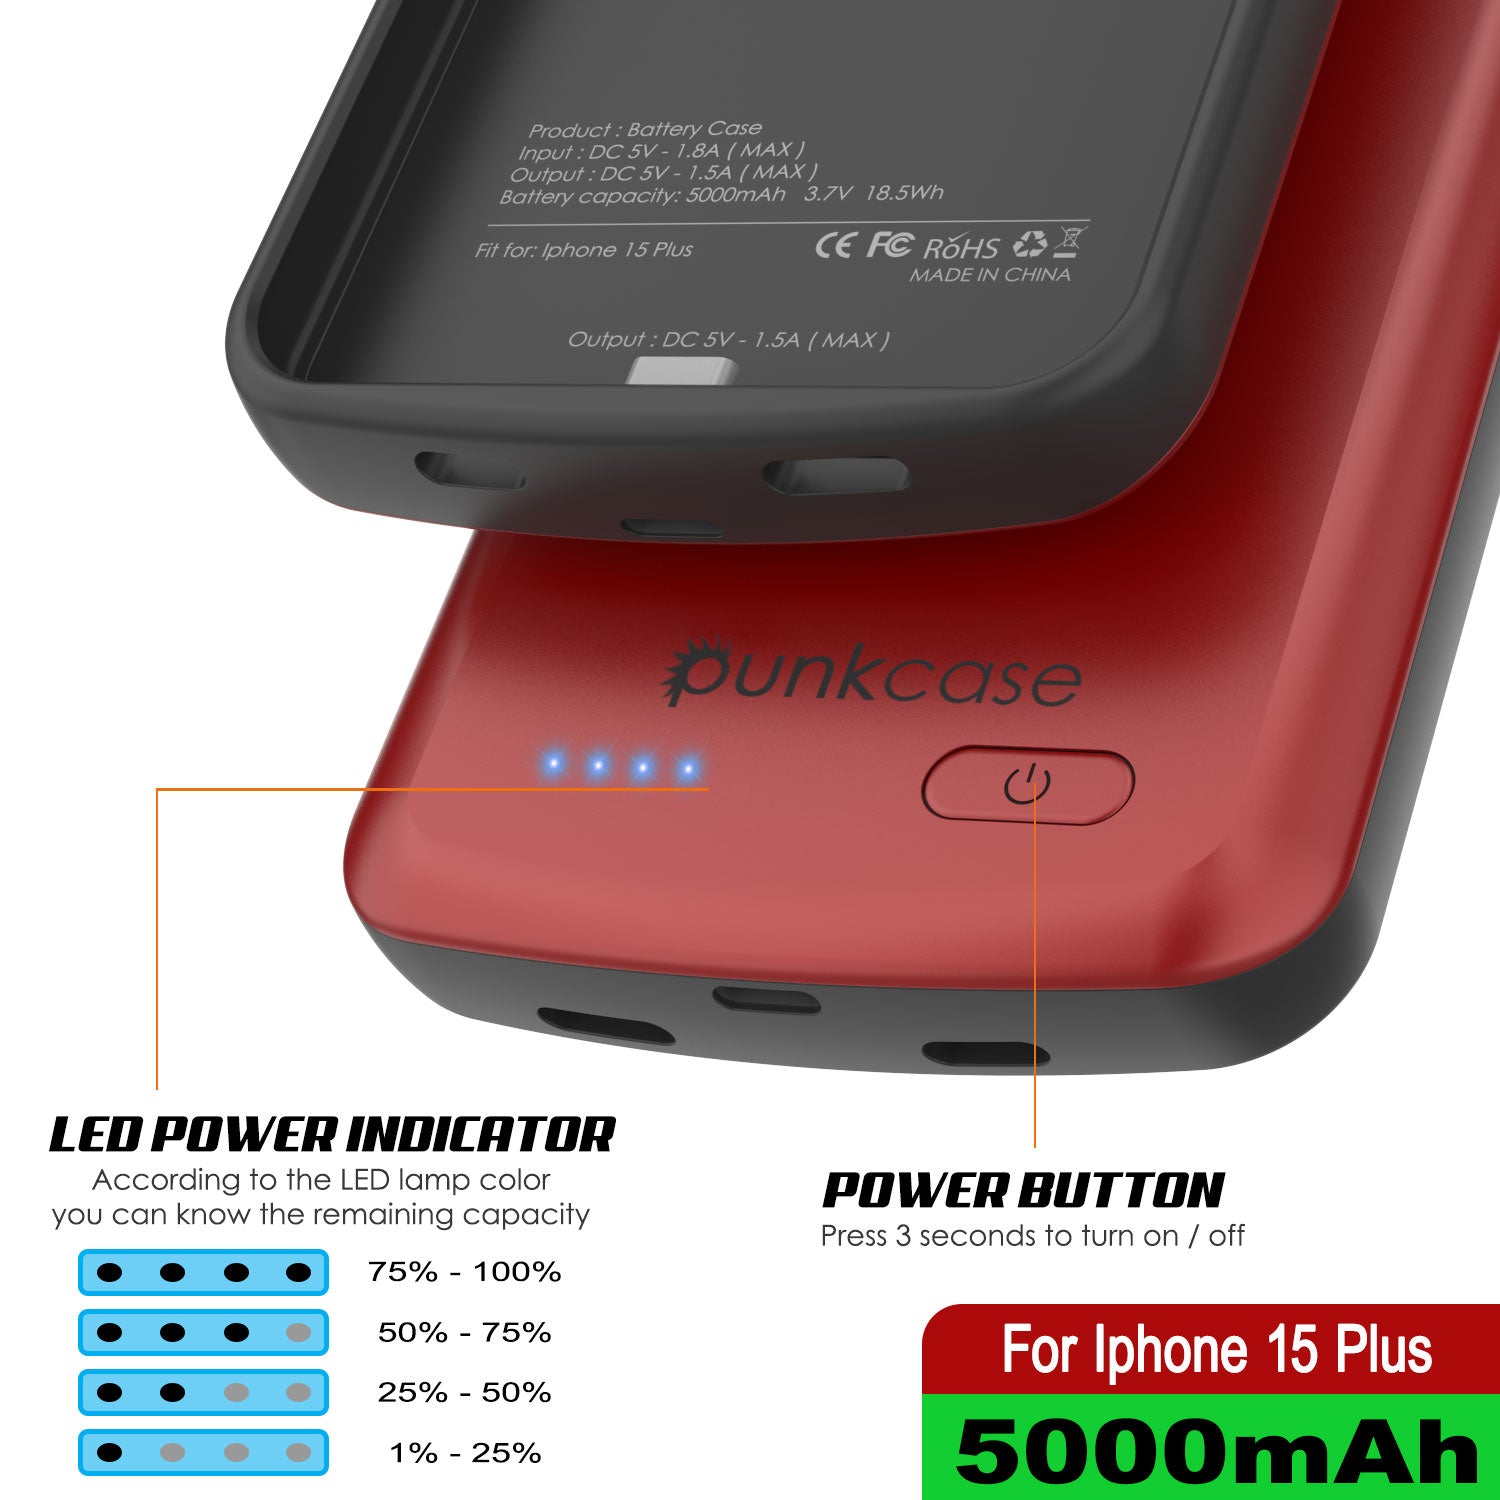 iPhone 15 Plus Battery Case, PunkJuice 5000mAH Fast Charging Power Bank W/ Screen Protector | [Red]